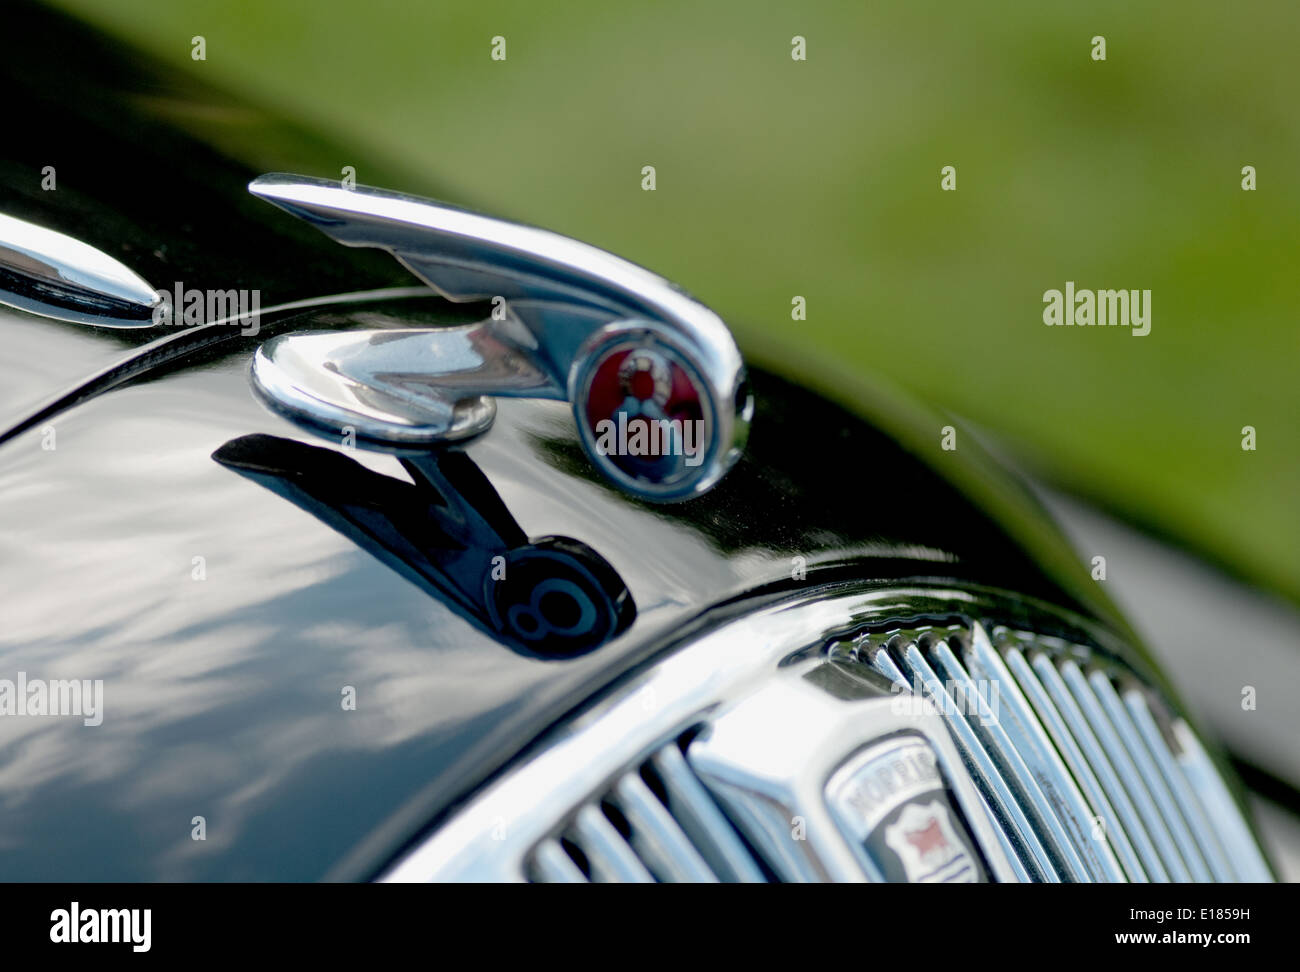 Vintage morris Car Abstract image Stock Photo